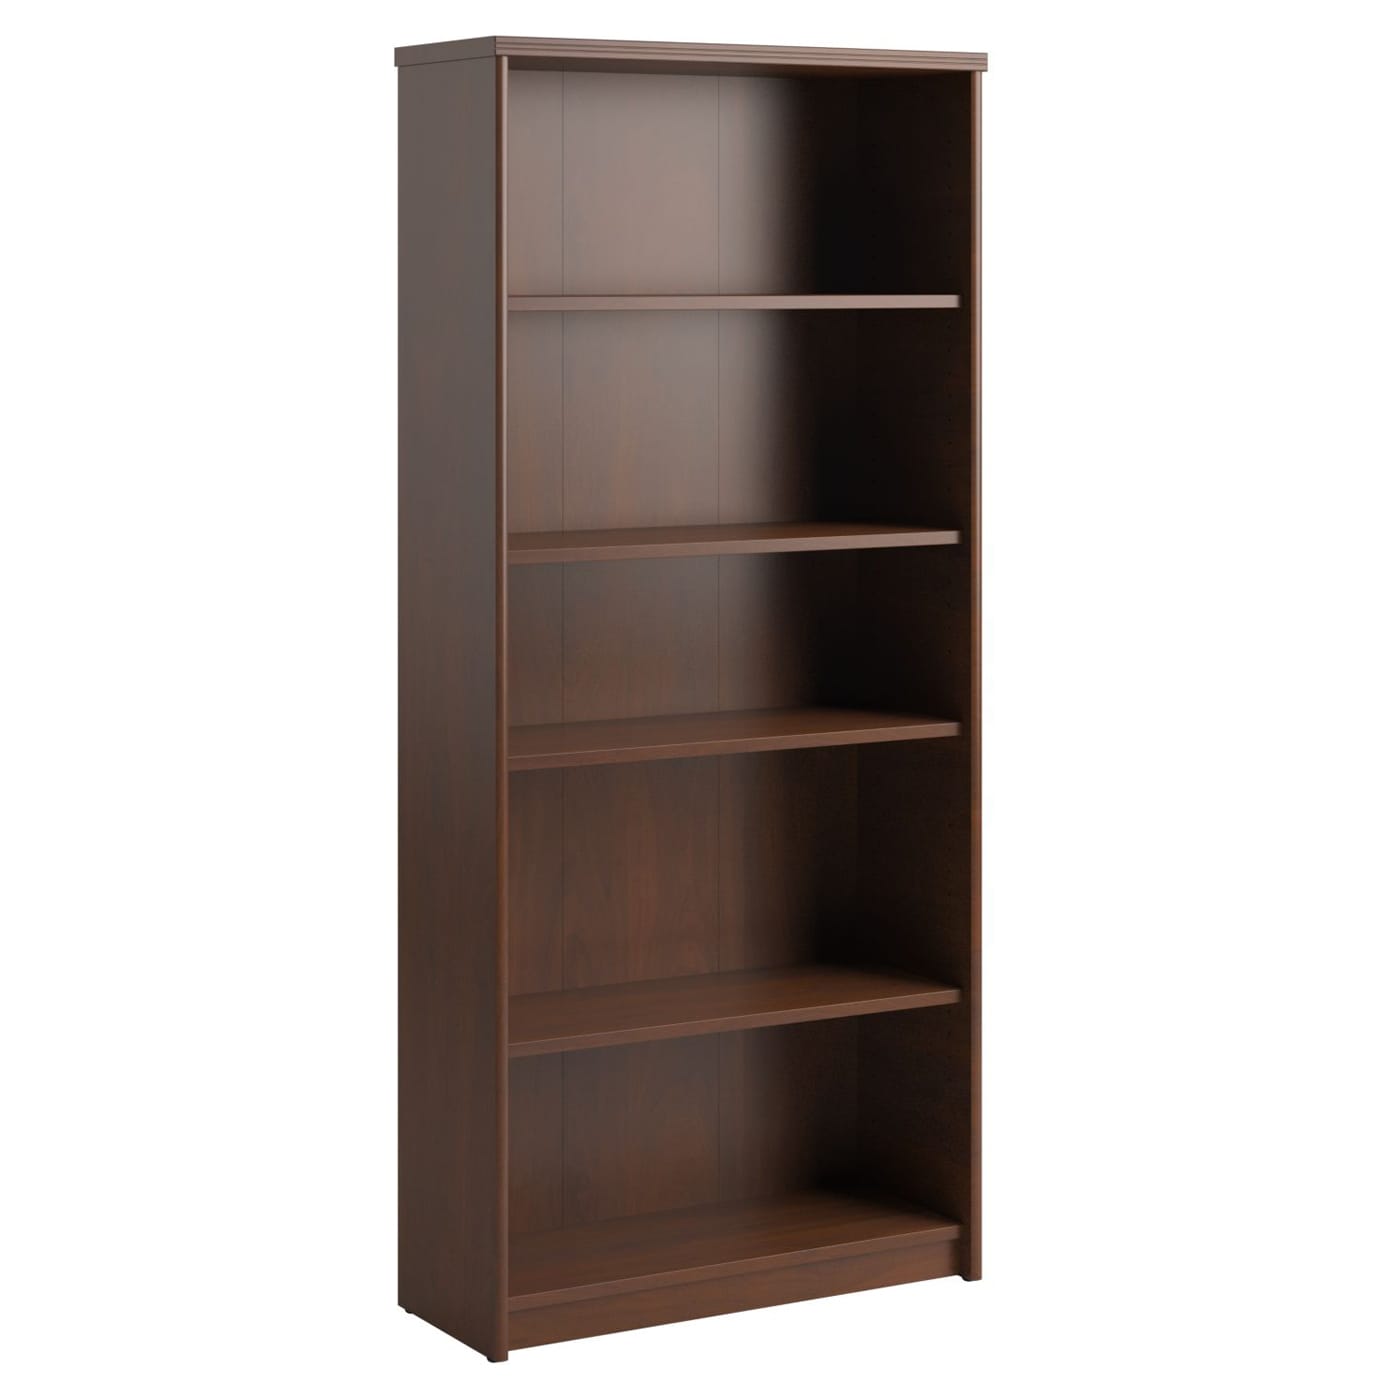 SOS ATG - BUSH FURNITURE in the Bookcases department at Lowes.com